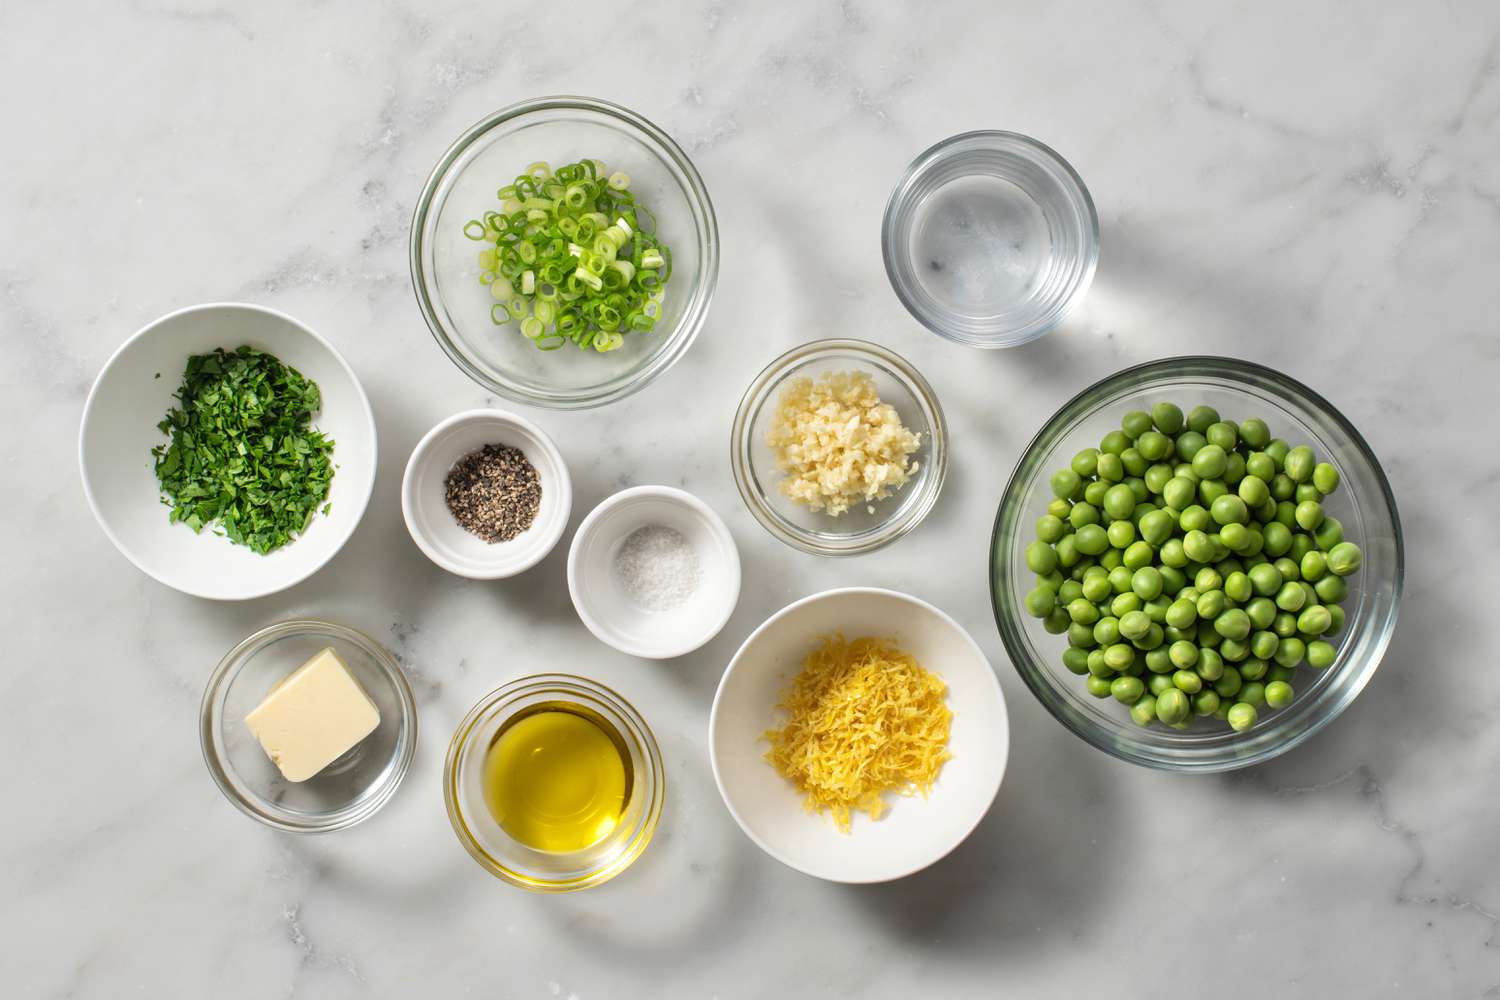 Ingredients to make cooked peas